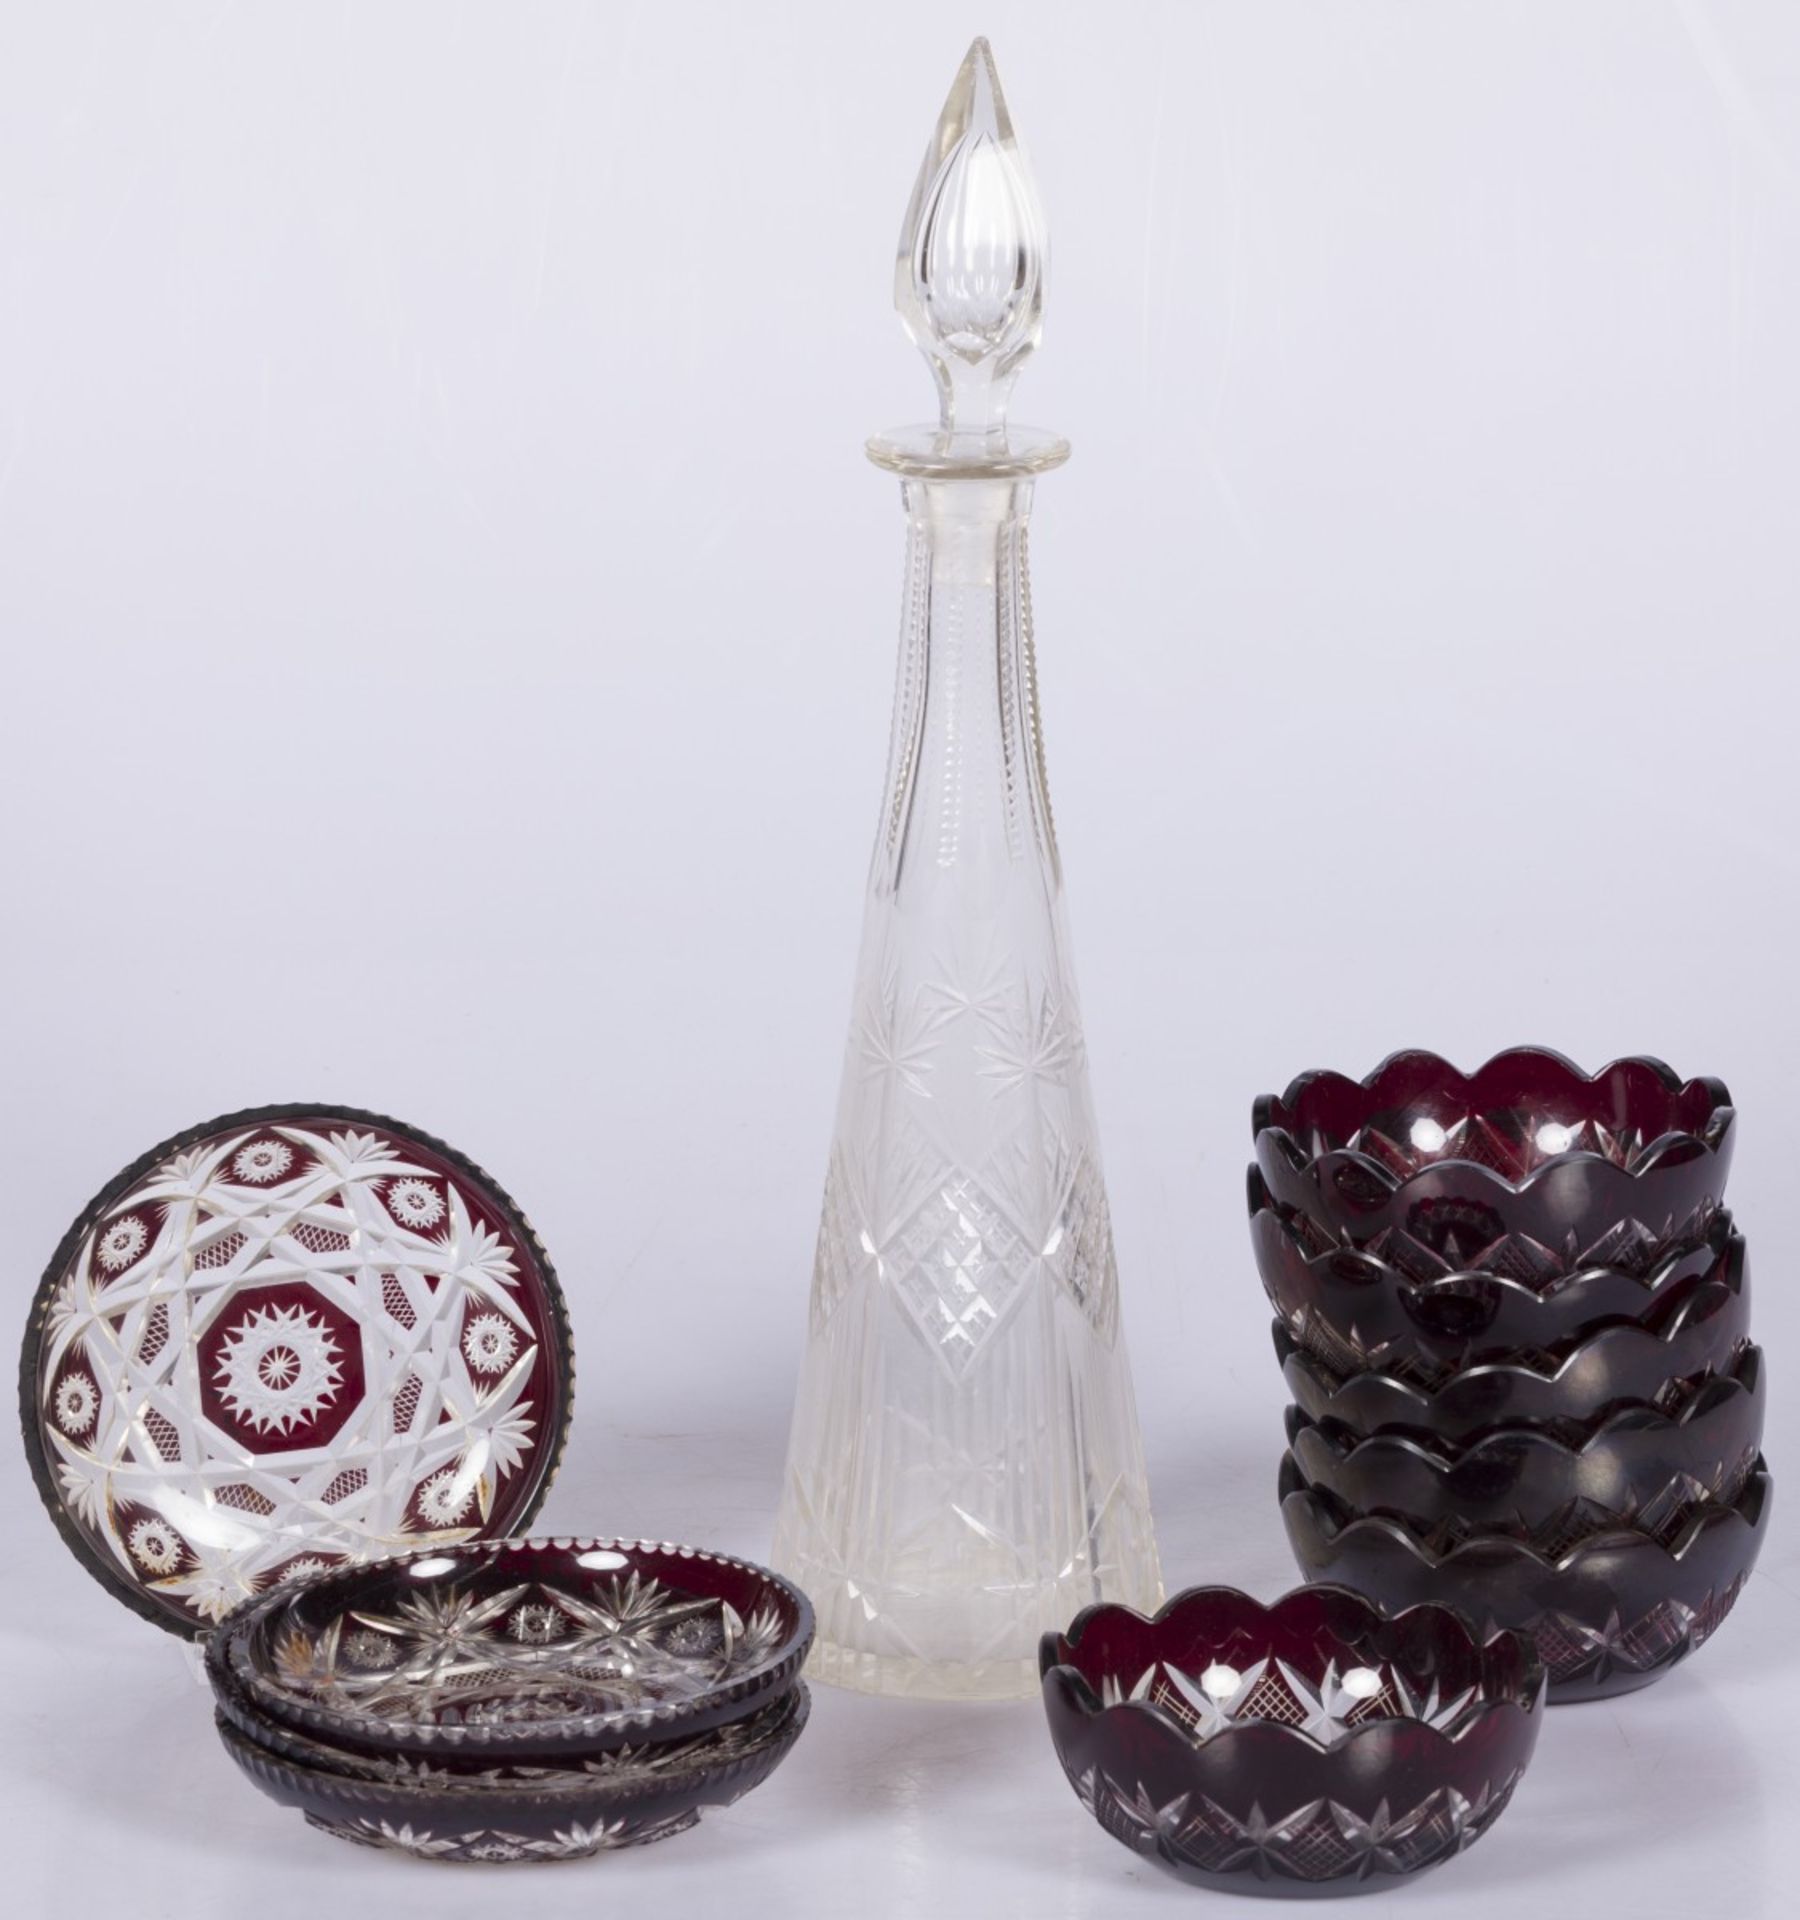 A clot comprising (6) "Bohemian" cut glass bowls, (3) ditto saucers, and one cut glass carafe, early